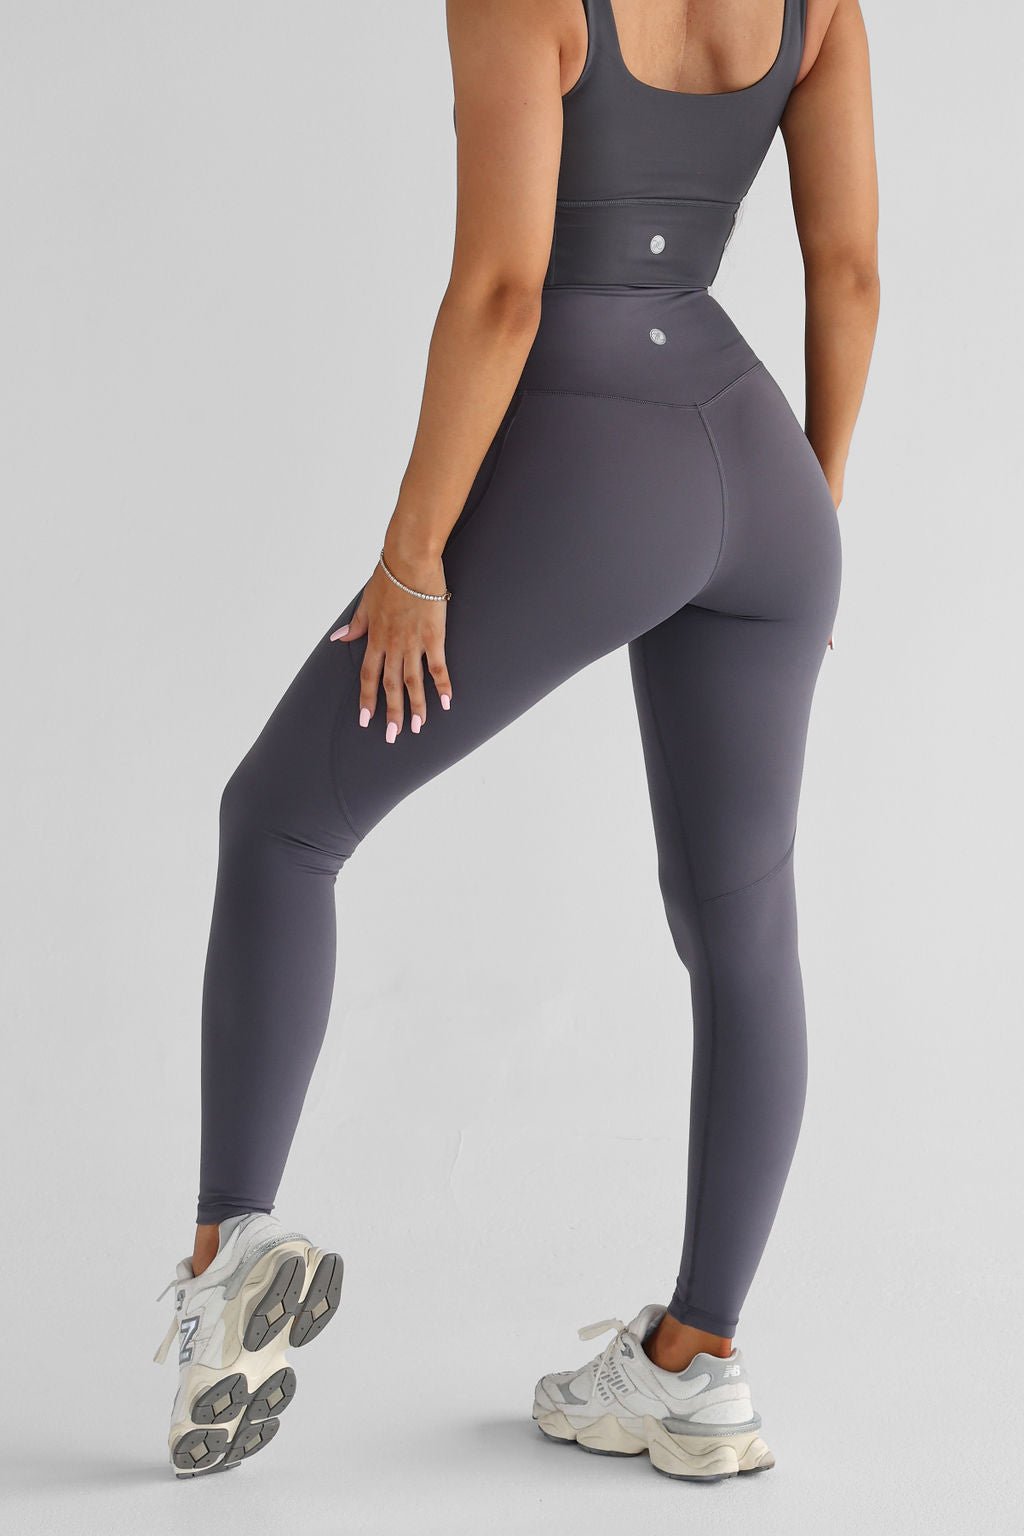 Charcoal Crossover leggings with pockets – SoWhat